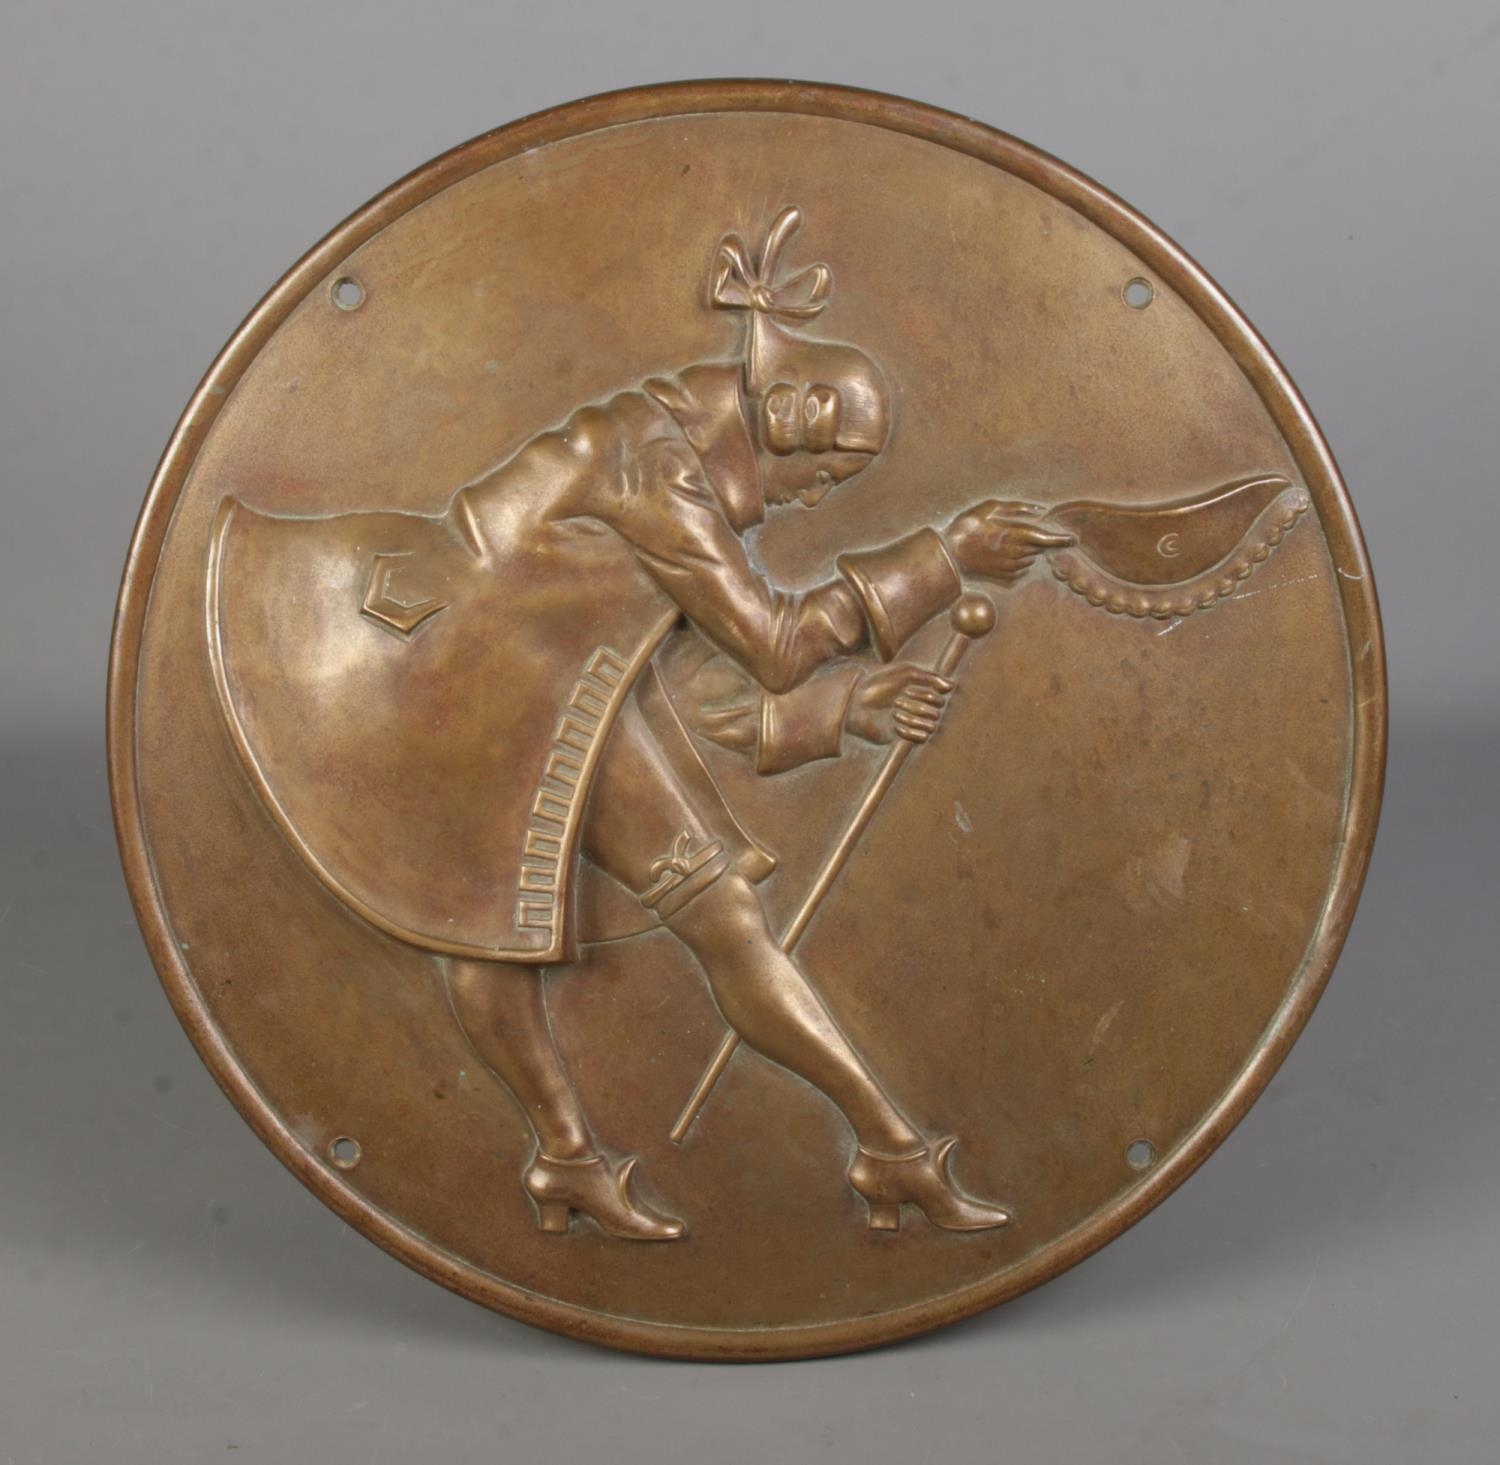 A large circular bronze plaque, depicting a gentleman holding a cane doffing his hat. Diameter: